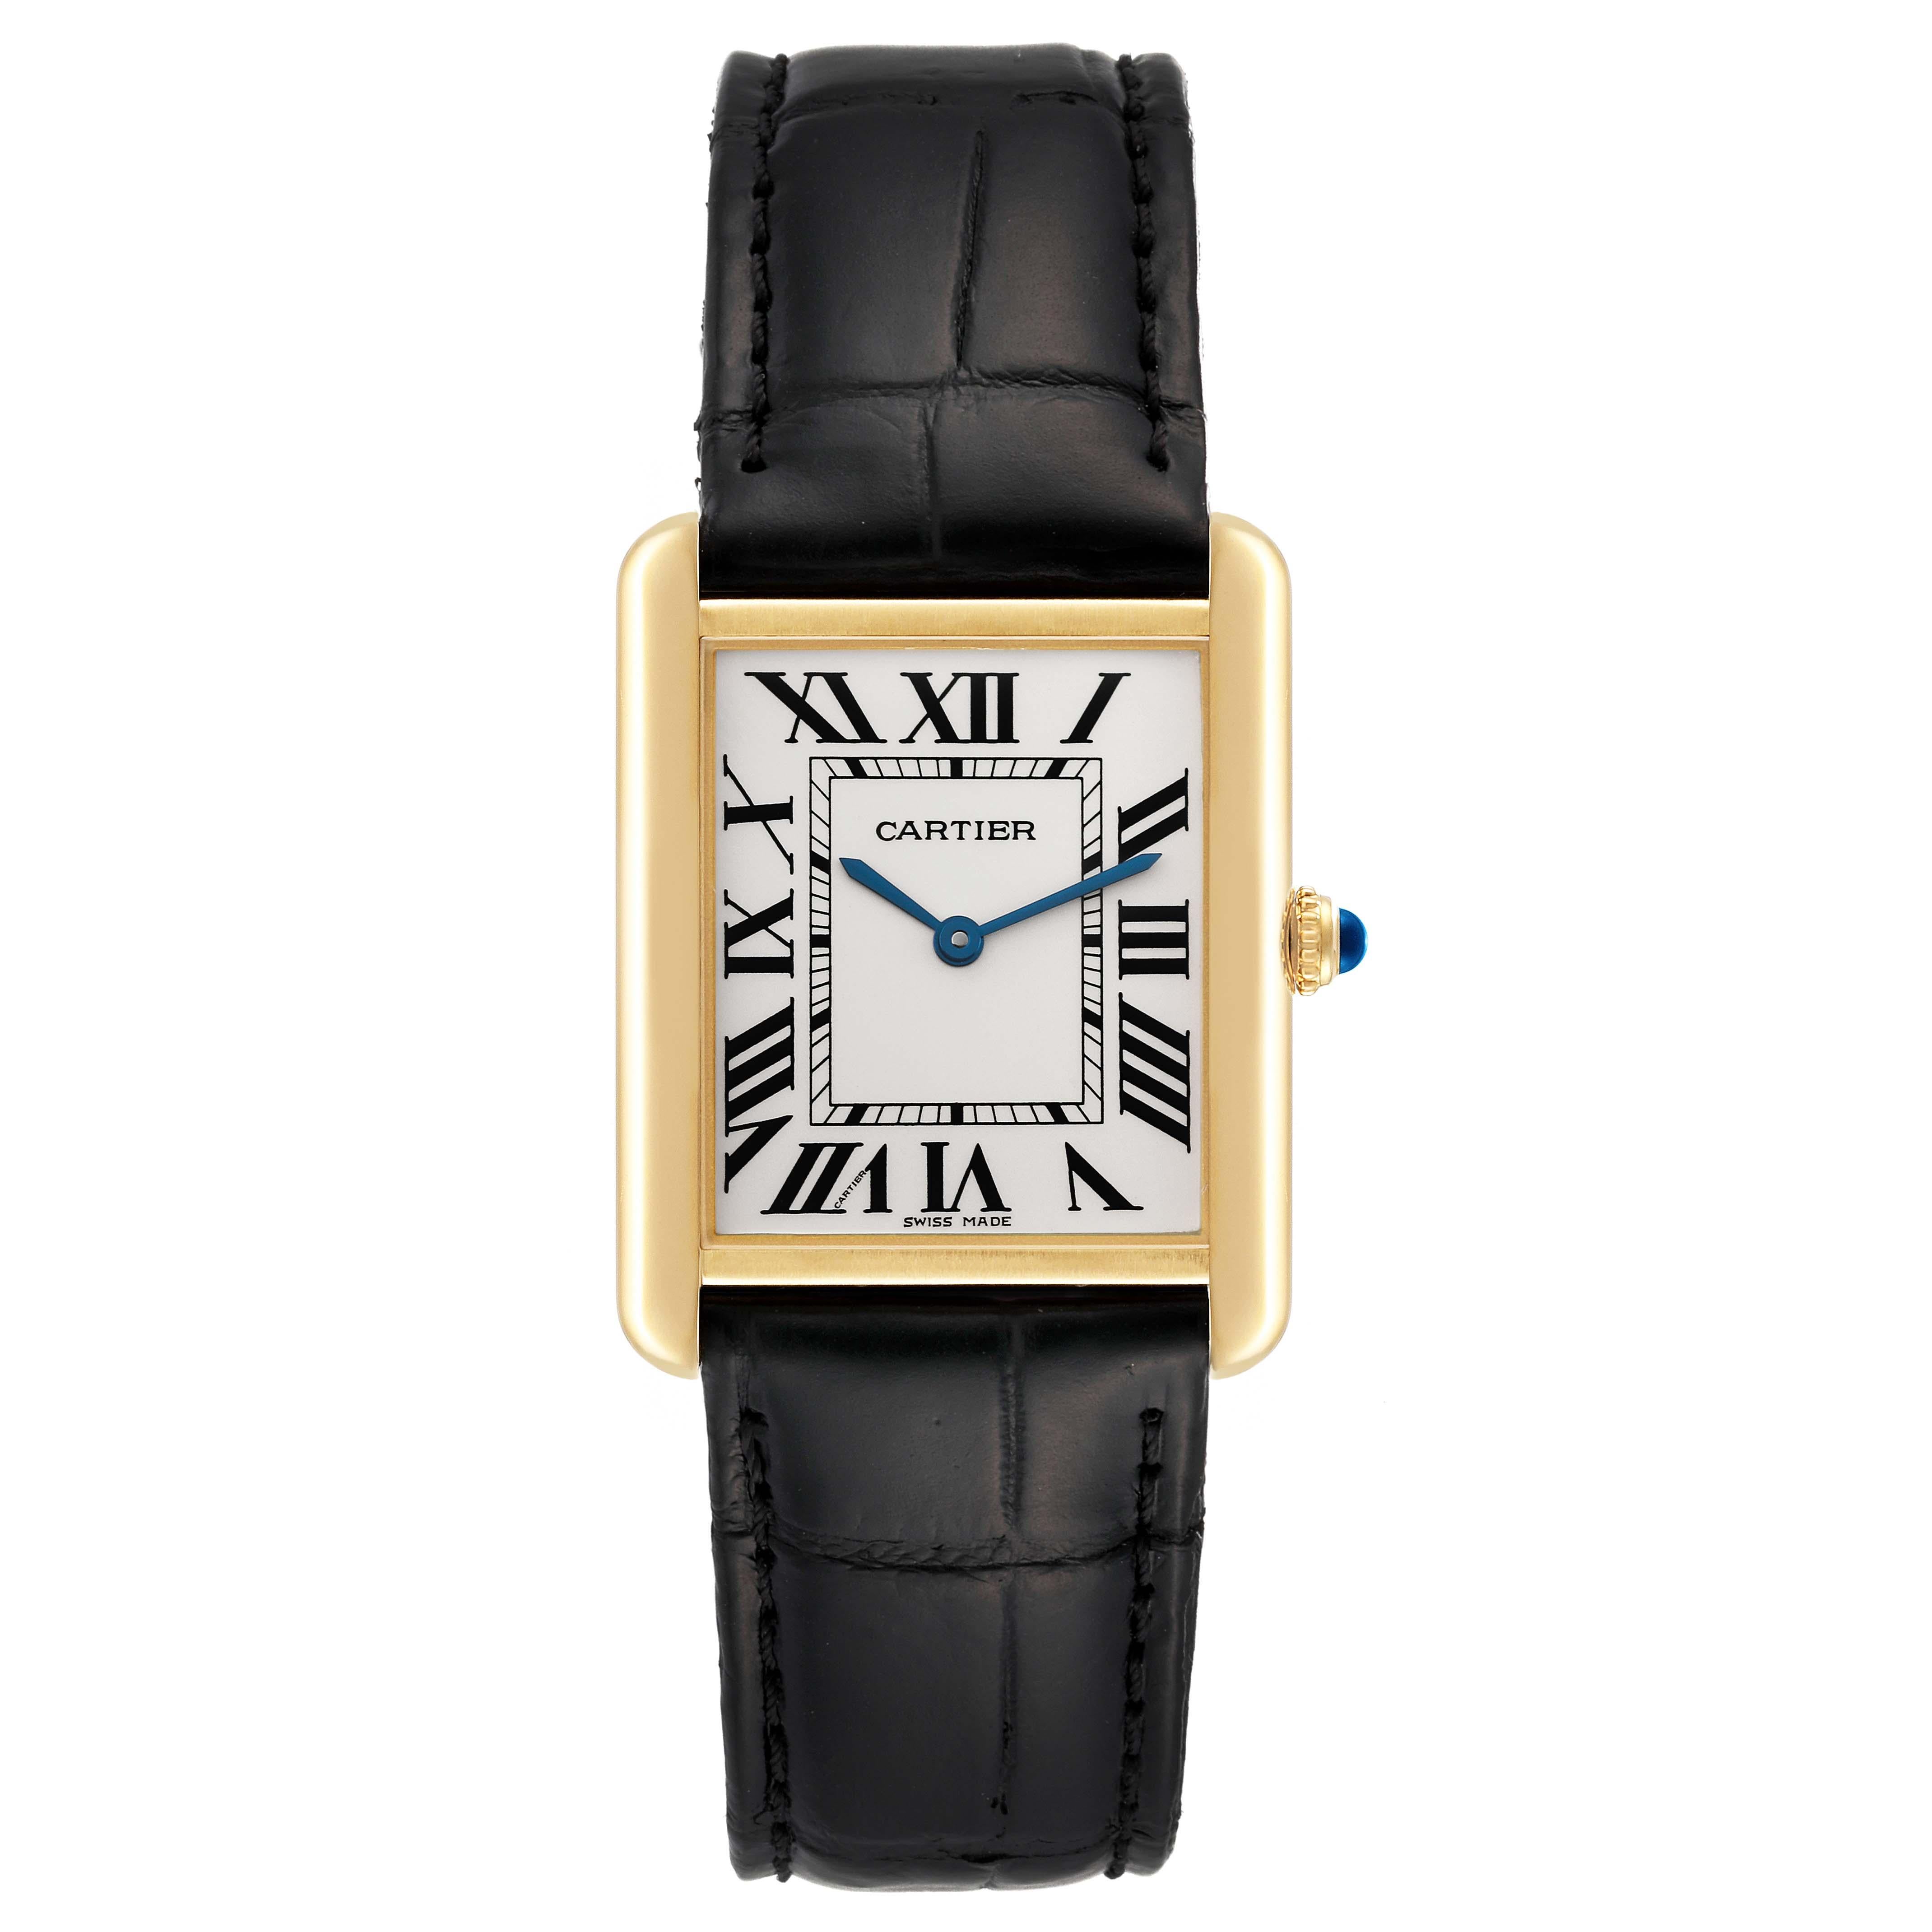 Cartier Tank Solo Yellow Gold Steel Black Strap Mens Watch W1018855. Quartz movement. 18k yellow gold/steel back case 34.0 x 27.0 mm. Circular grained crown set with a blue spinel cabochon. . Scratch resistant sapphire crystal. Silver opaline dial